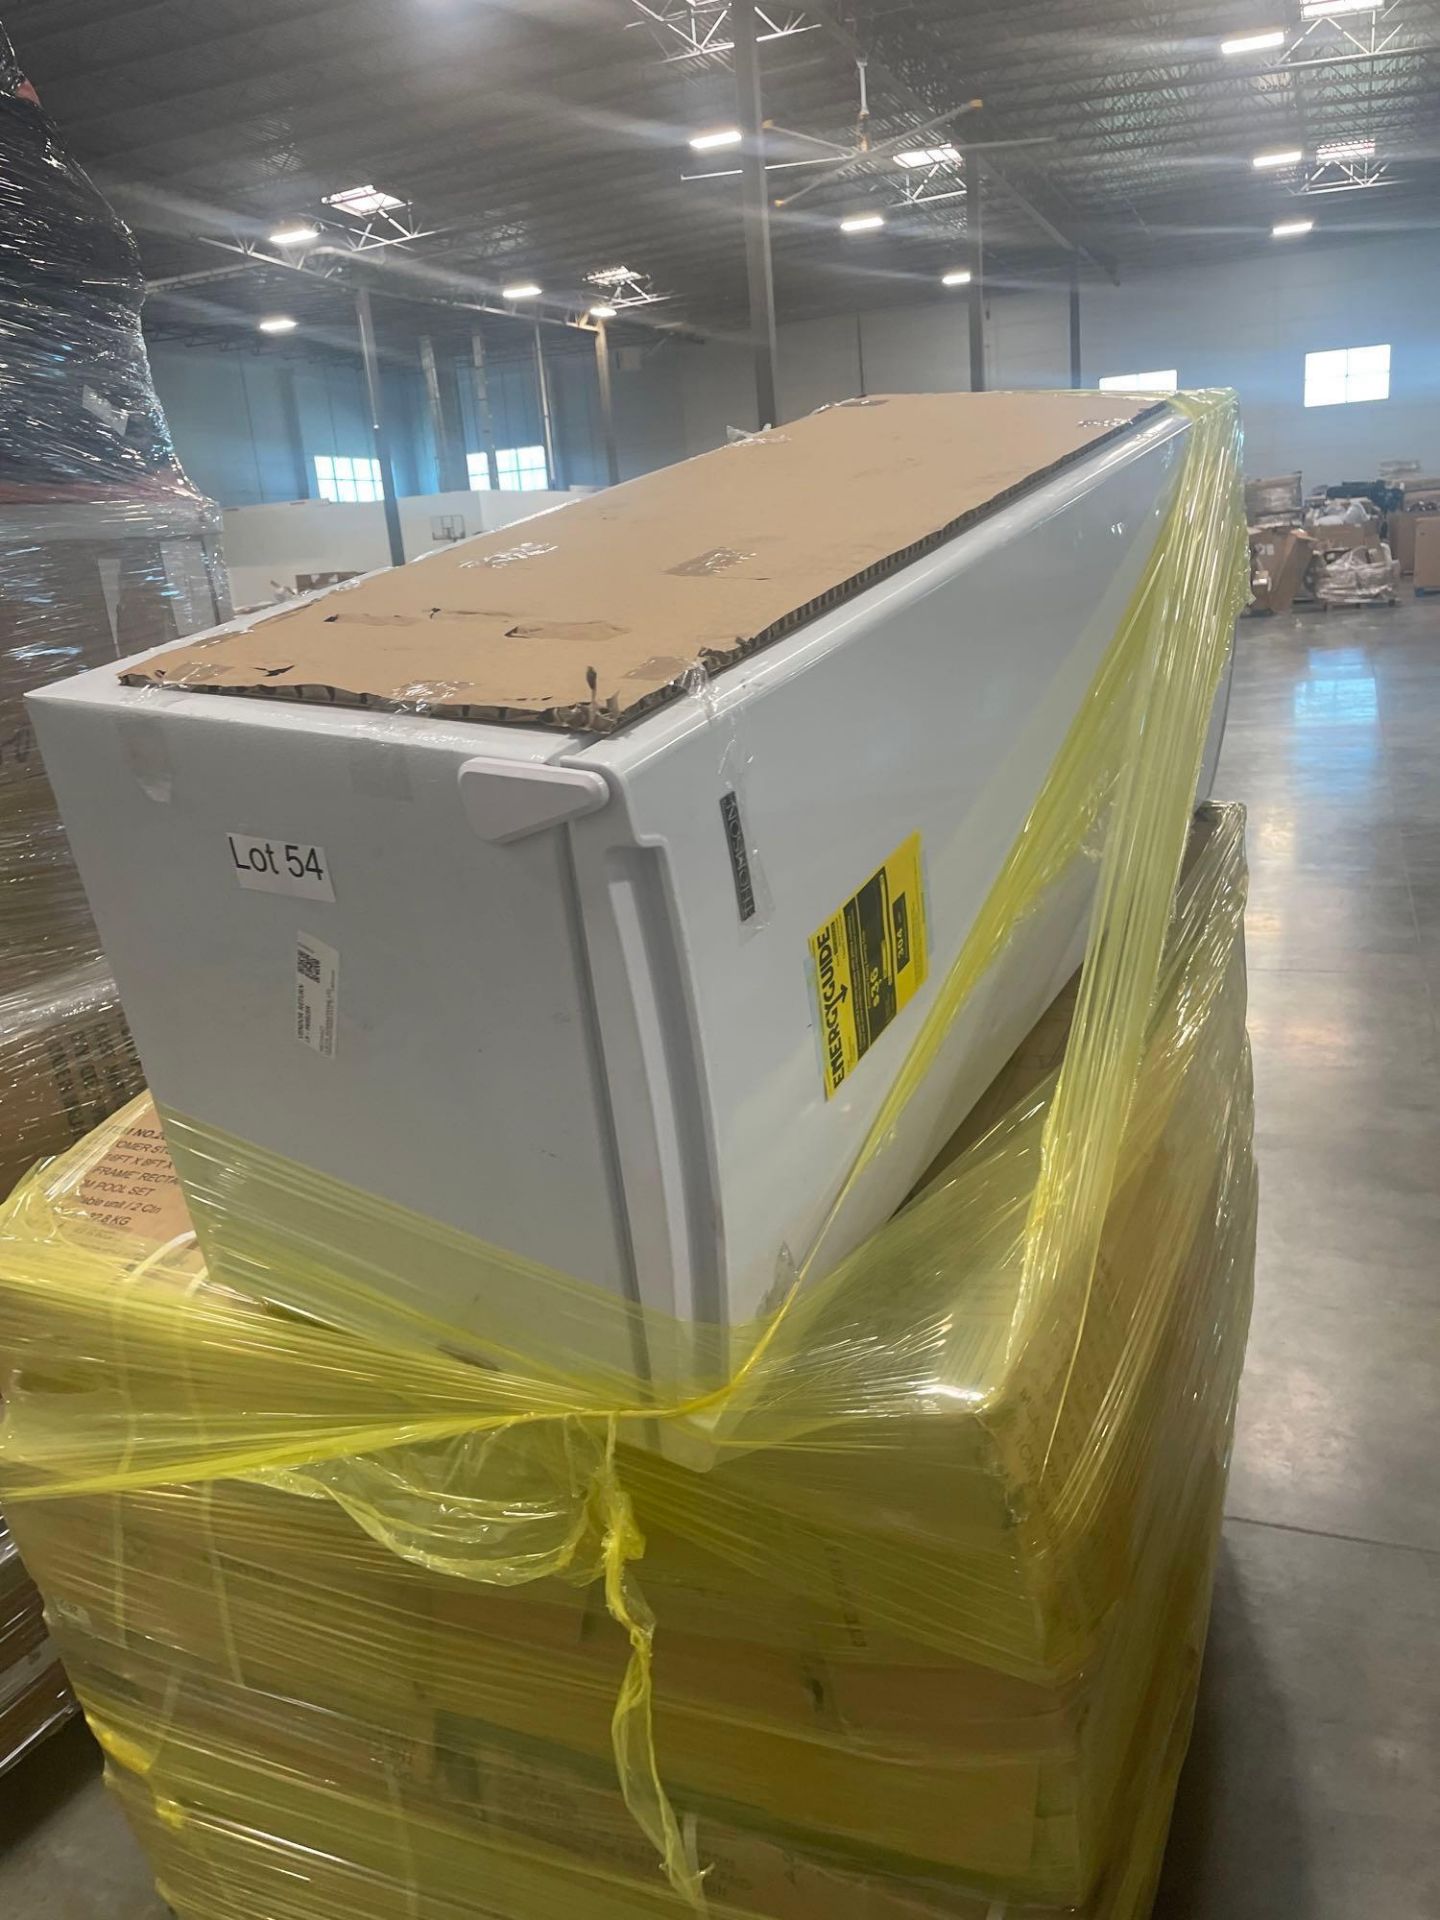 pallet of fridge and Intex prism frame rectangular pools appear to be multiple units - Bild 2 aus 7